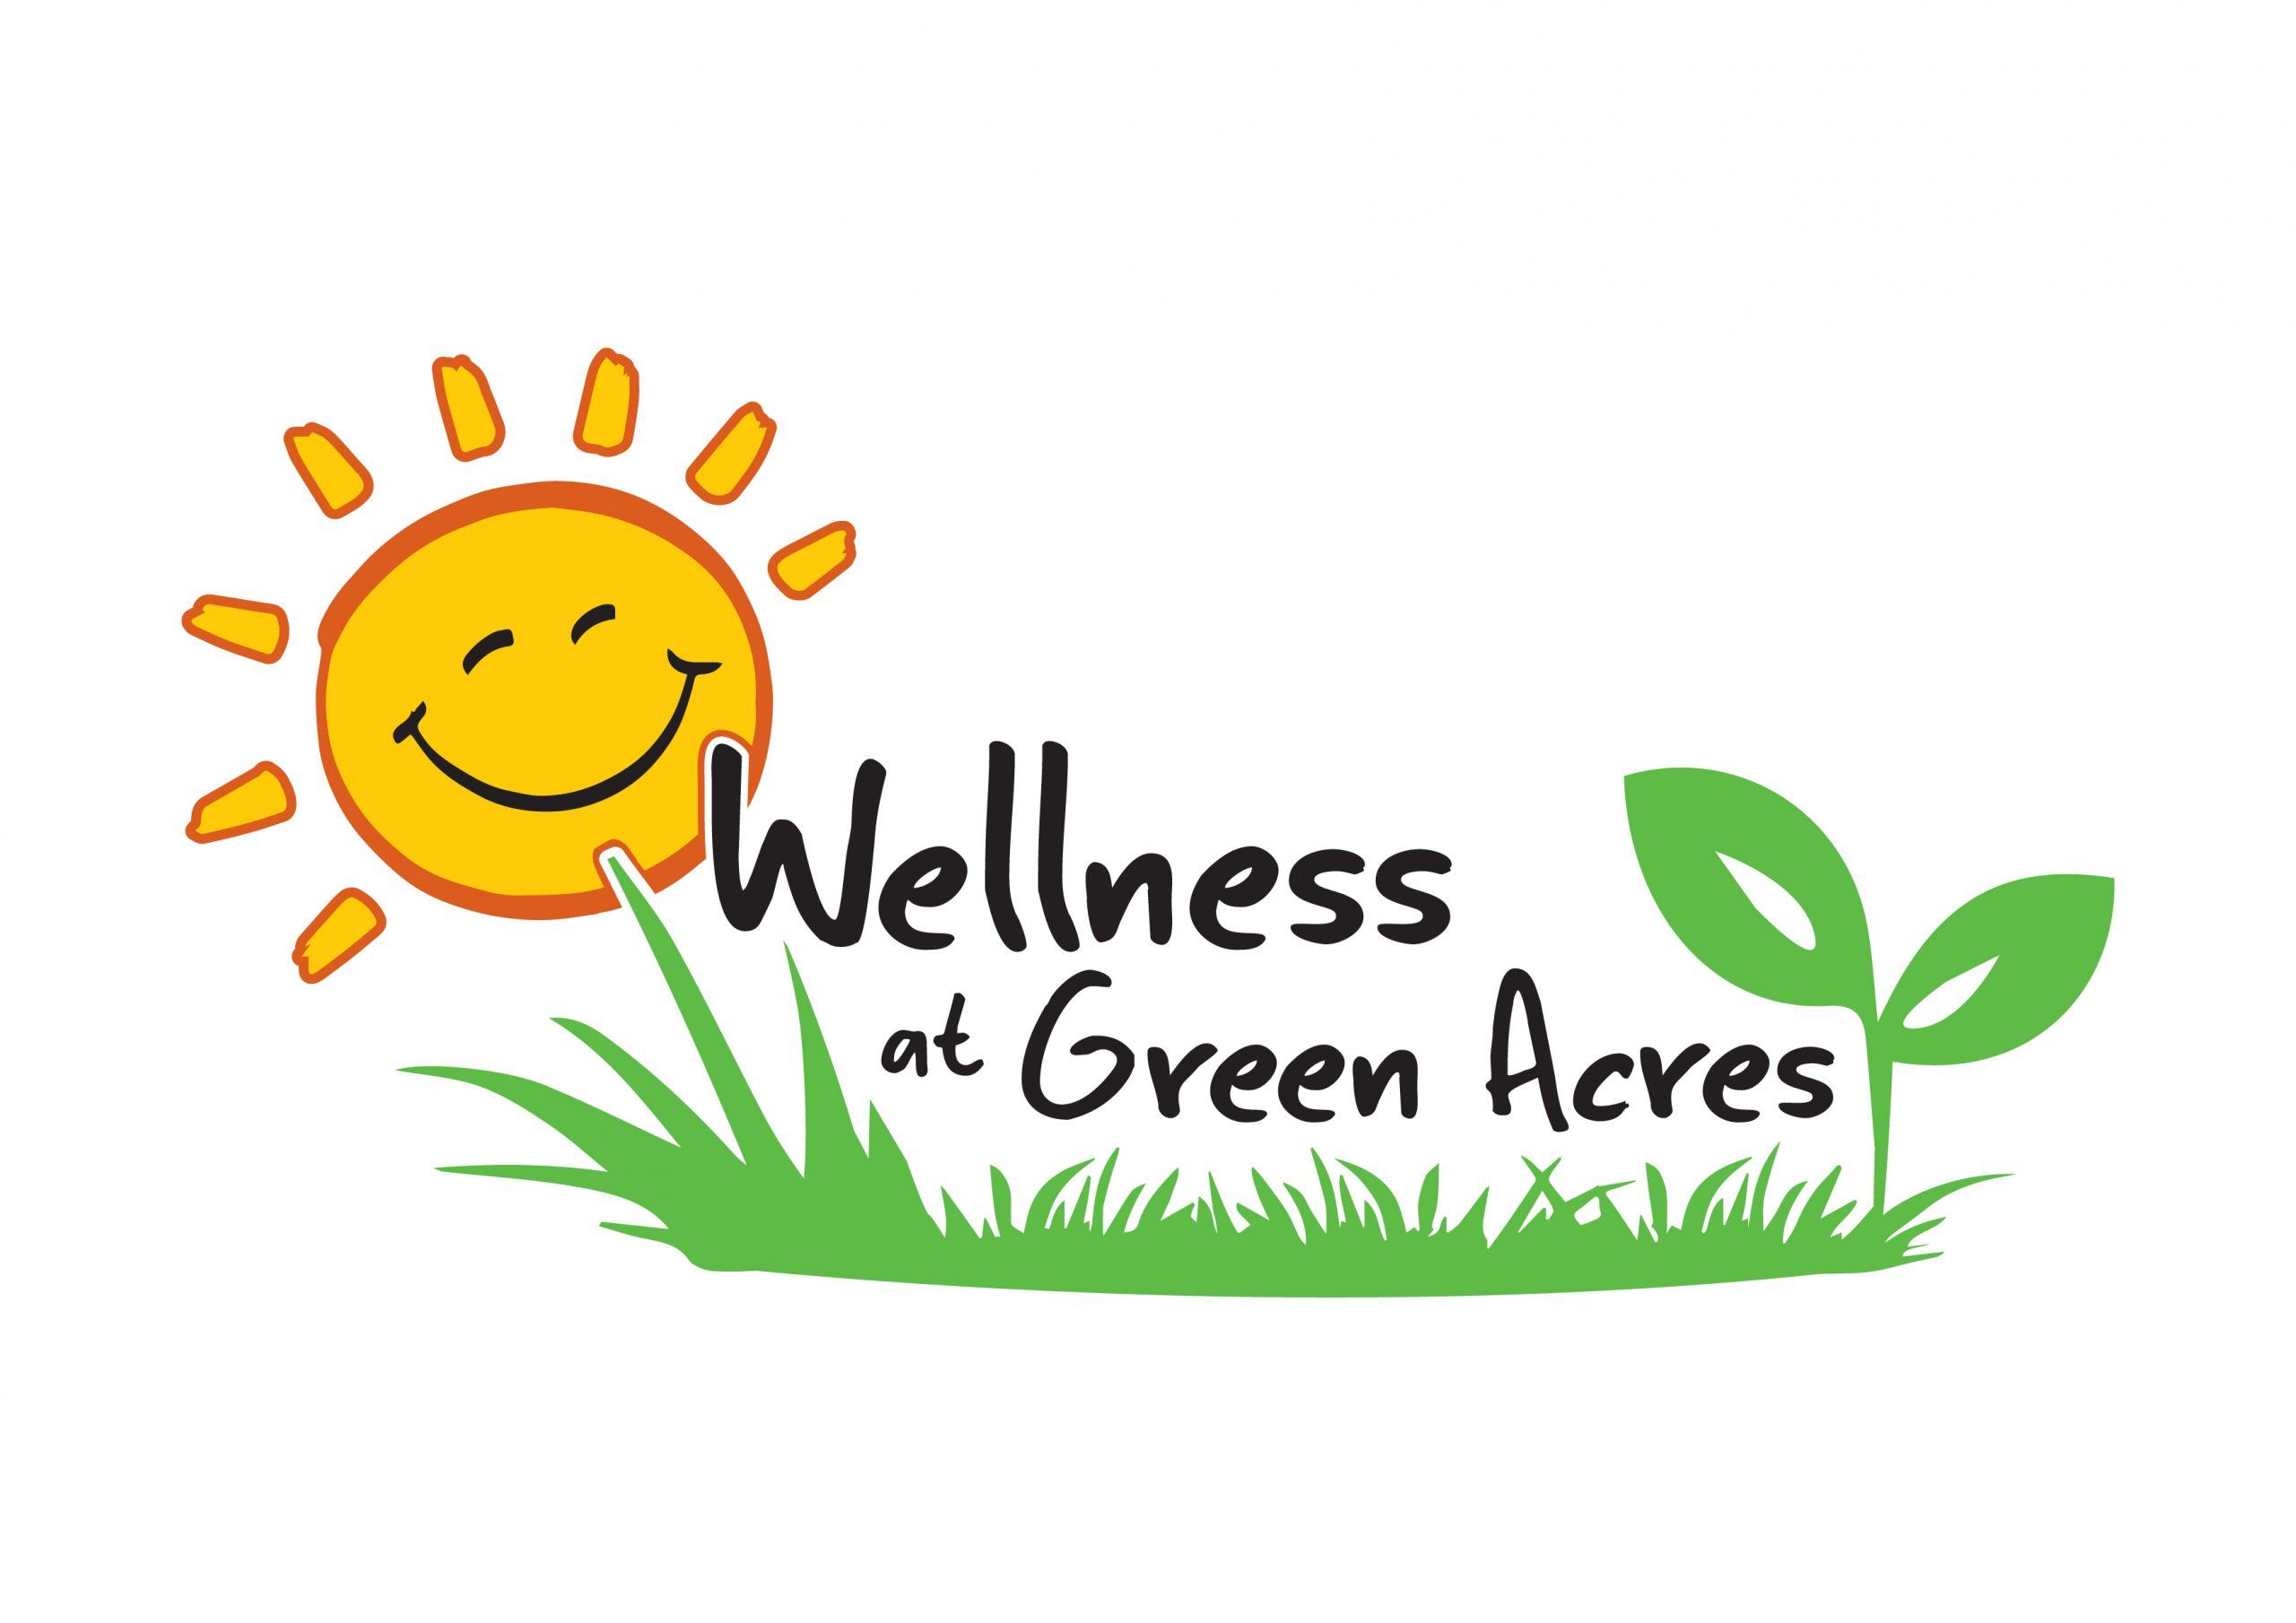 Wellness at Green Acres